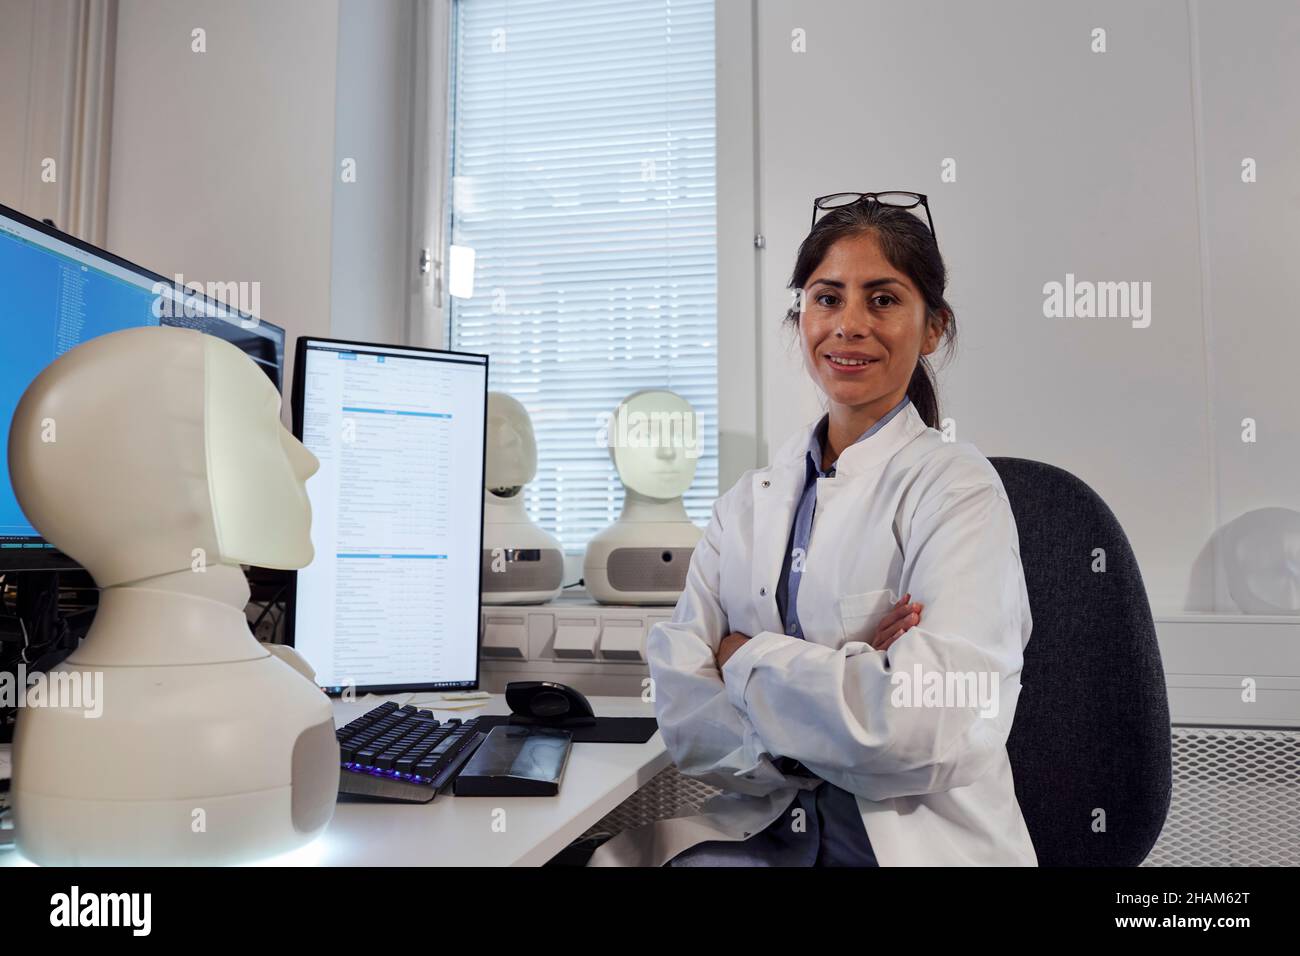 Portrait of female engineer at work station Stock Photo